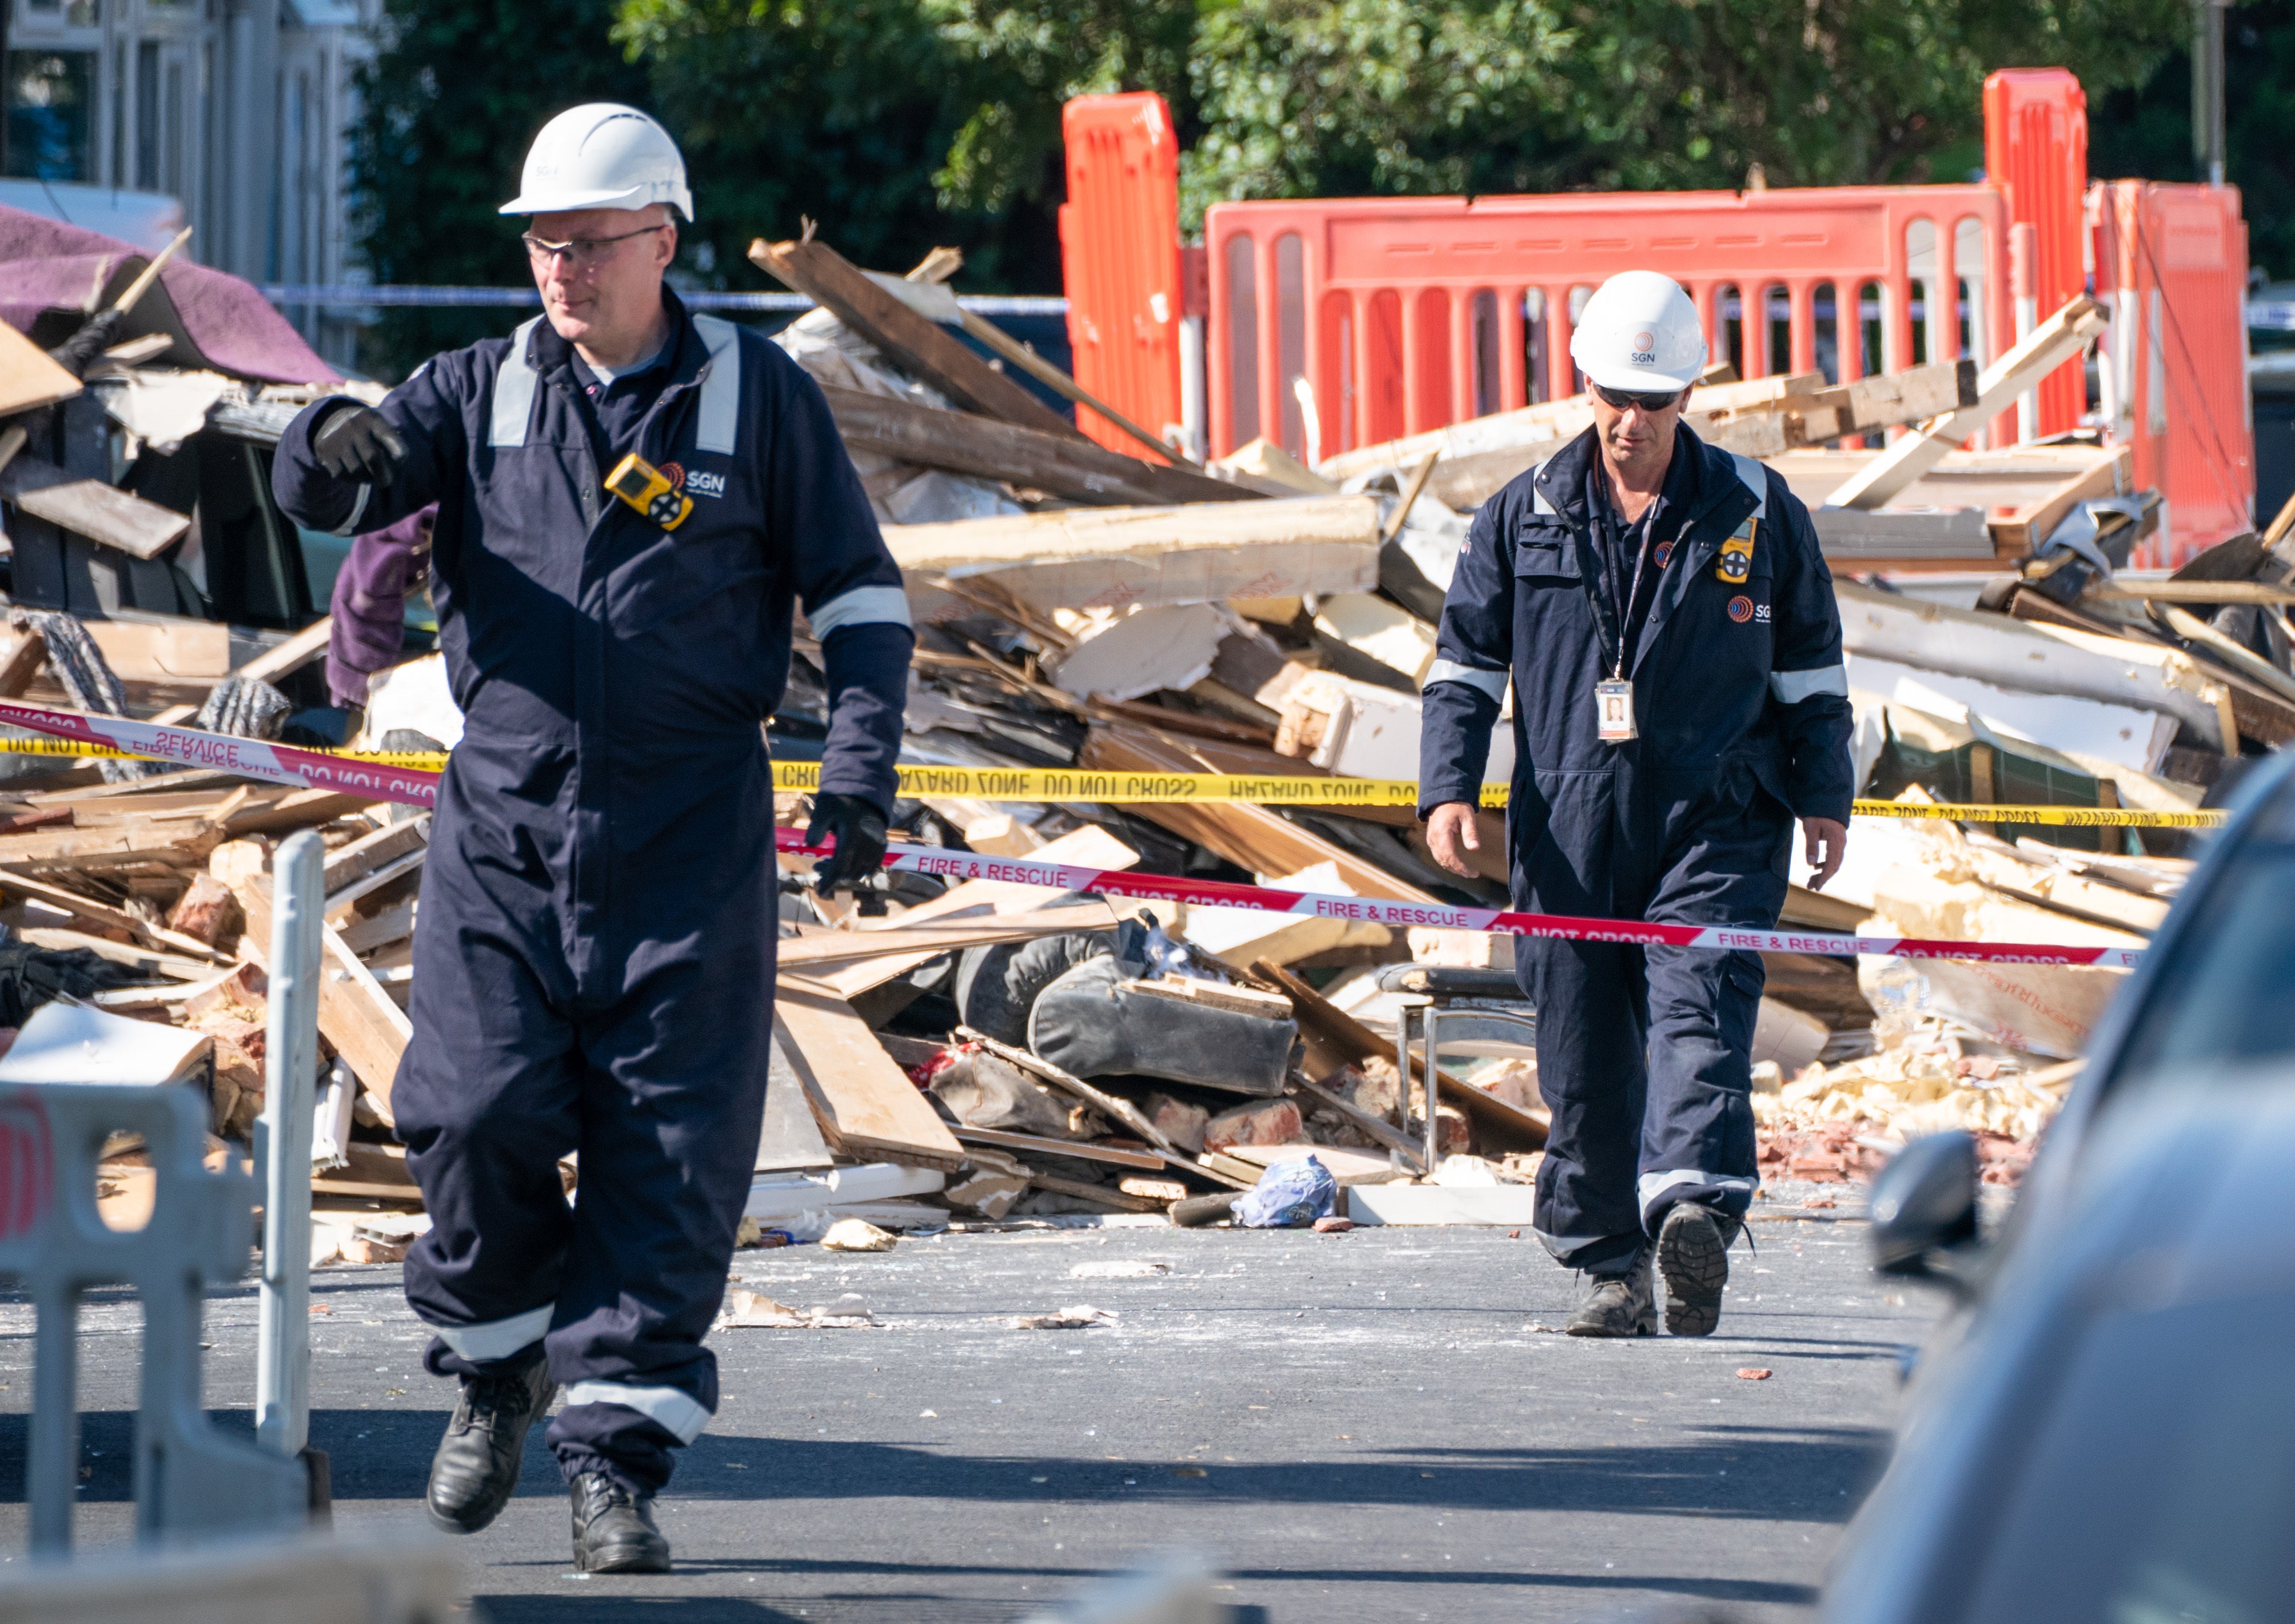 Engineers at the scene of the explosion on Galpin’s Road in Thornton Heath